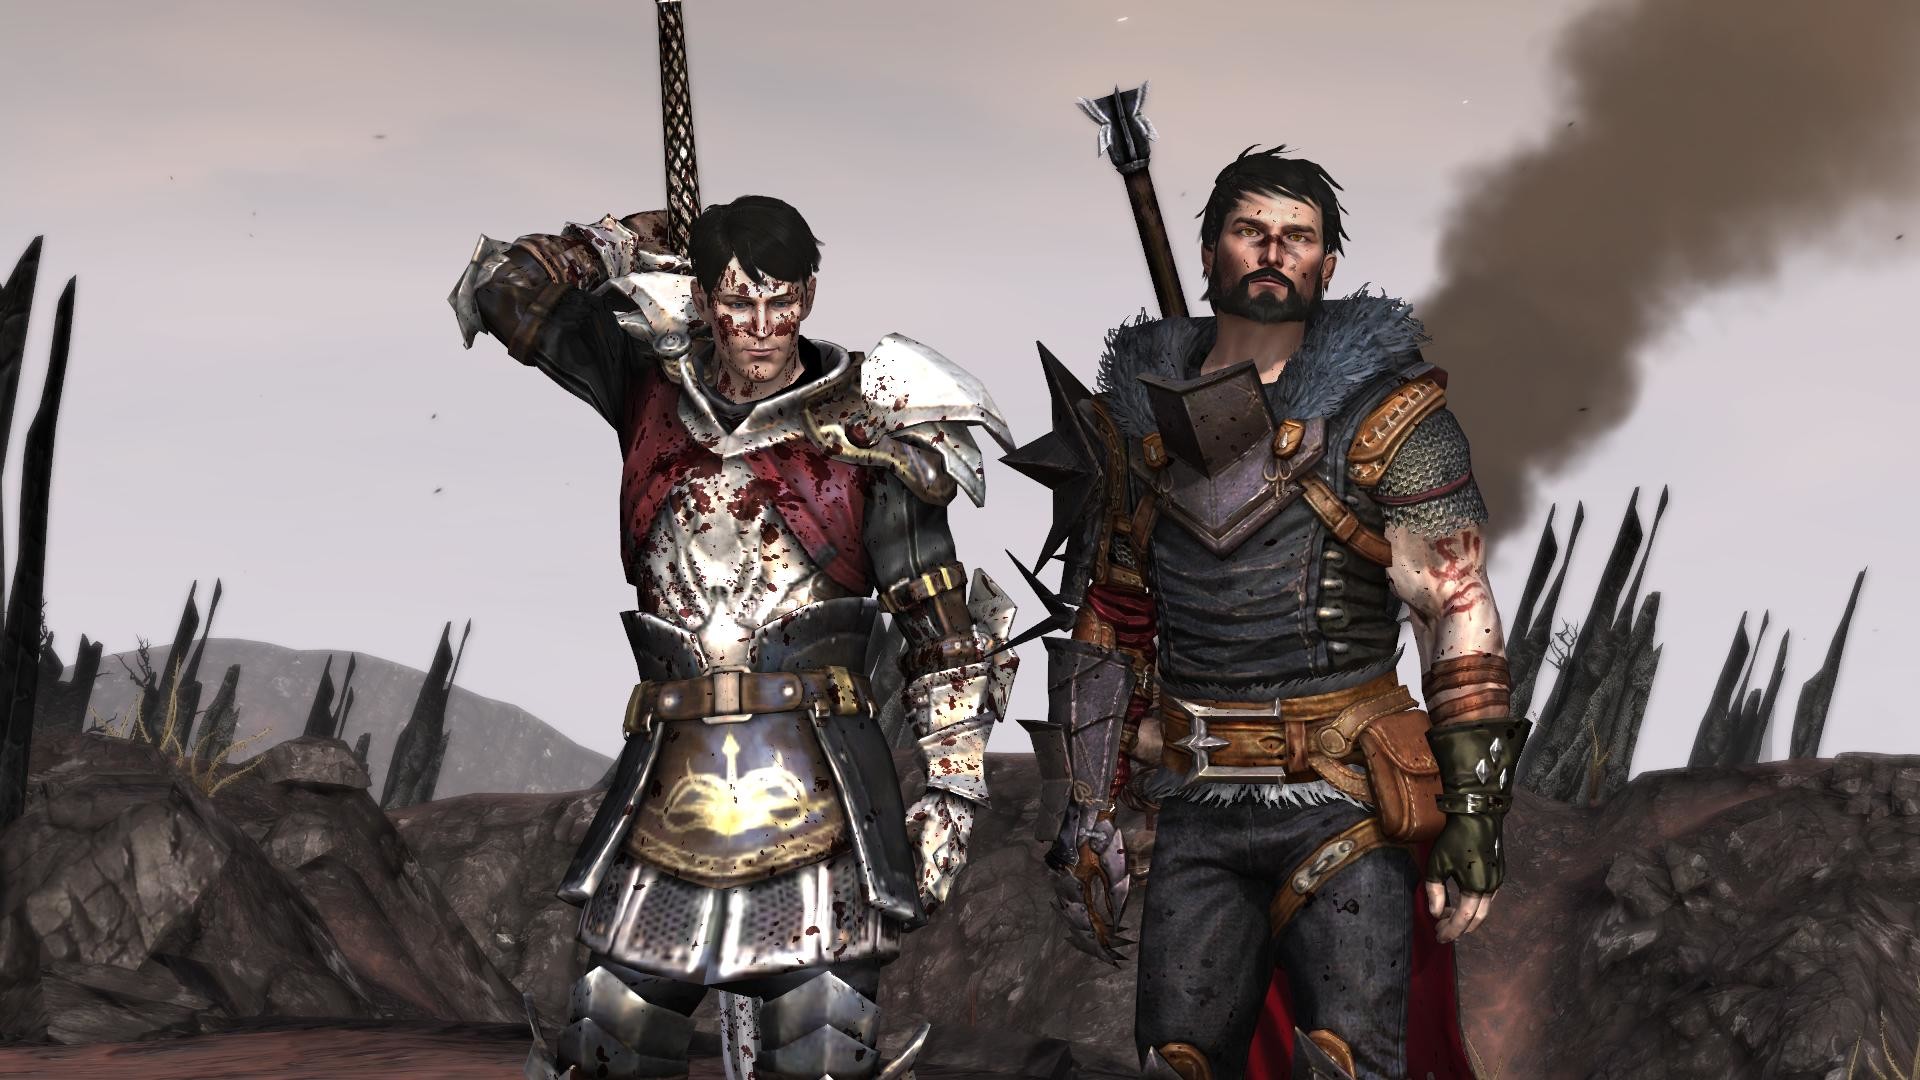 1920x1080 ... Dragon Age HD Wallpapers | HD Wallpapers, Backgrounds, Images, Art ...